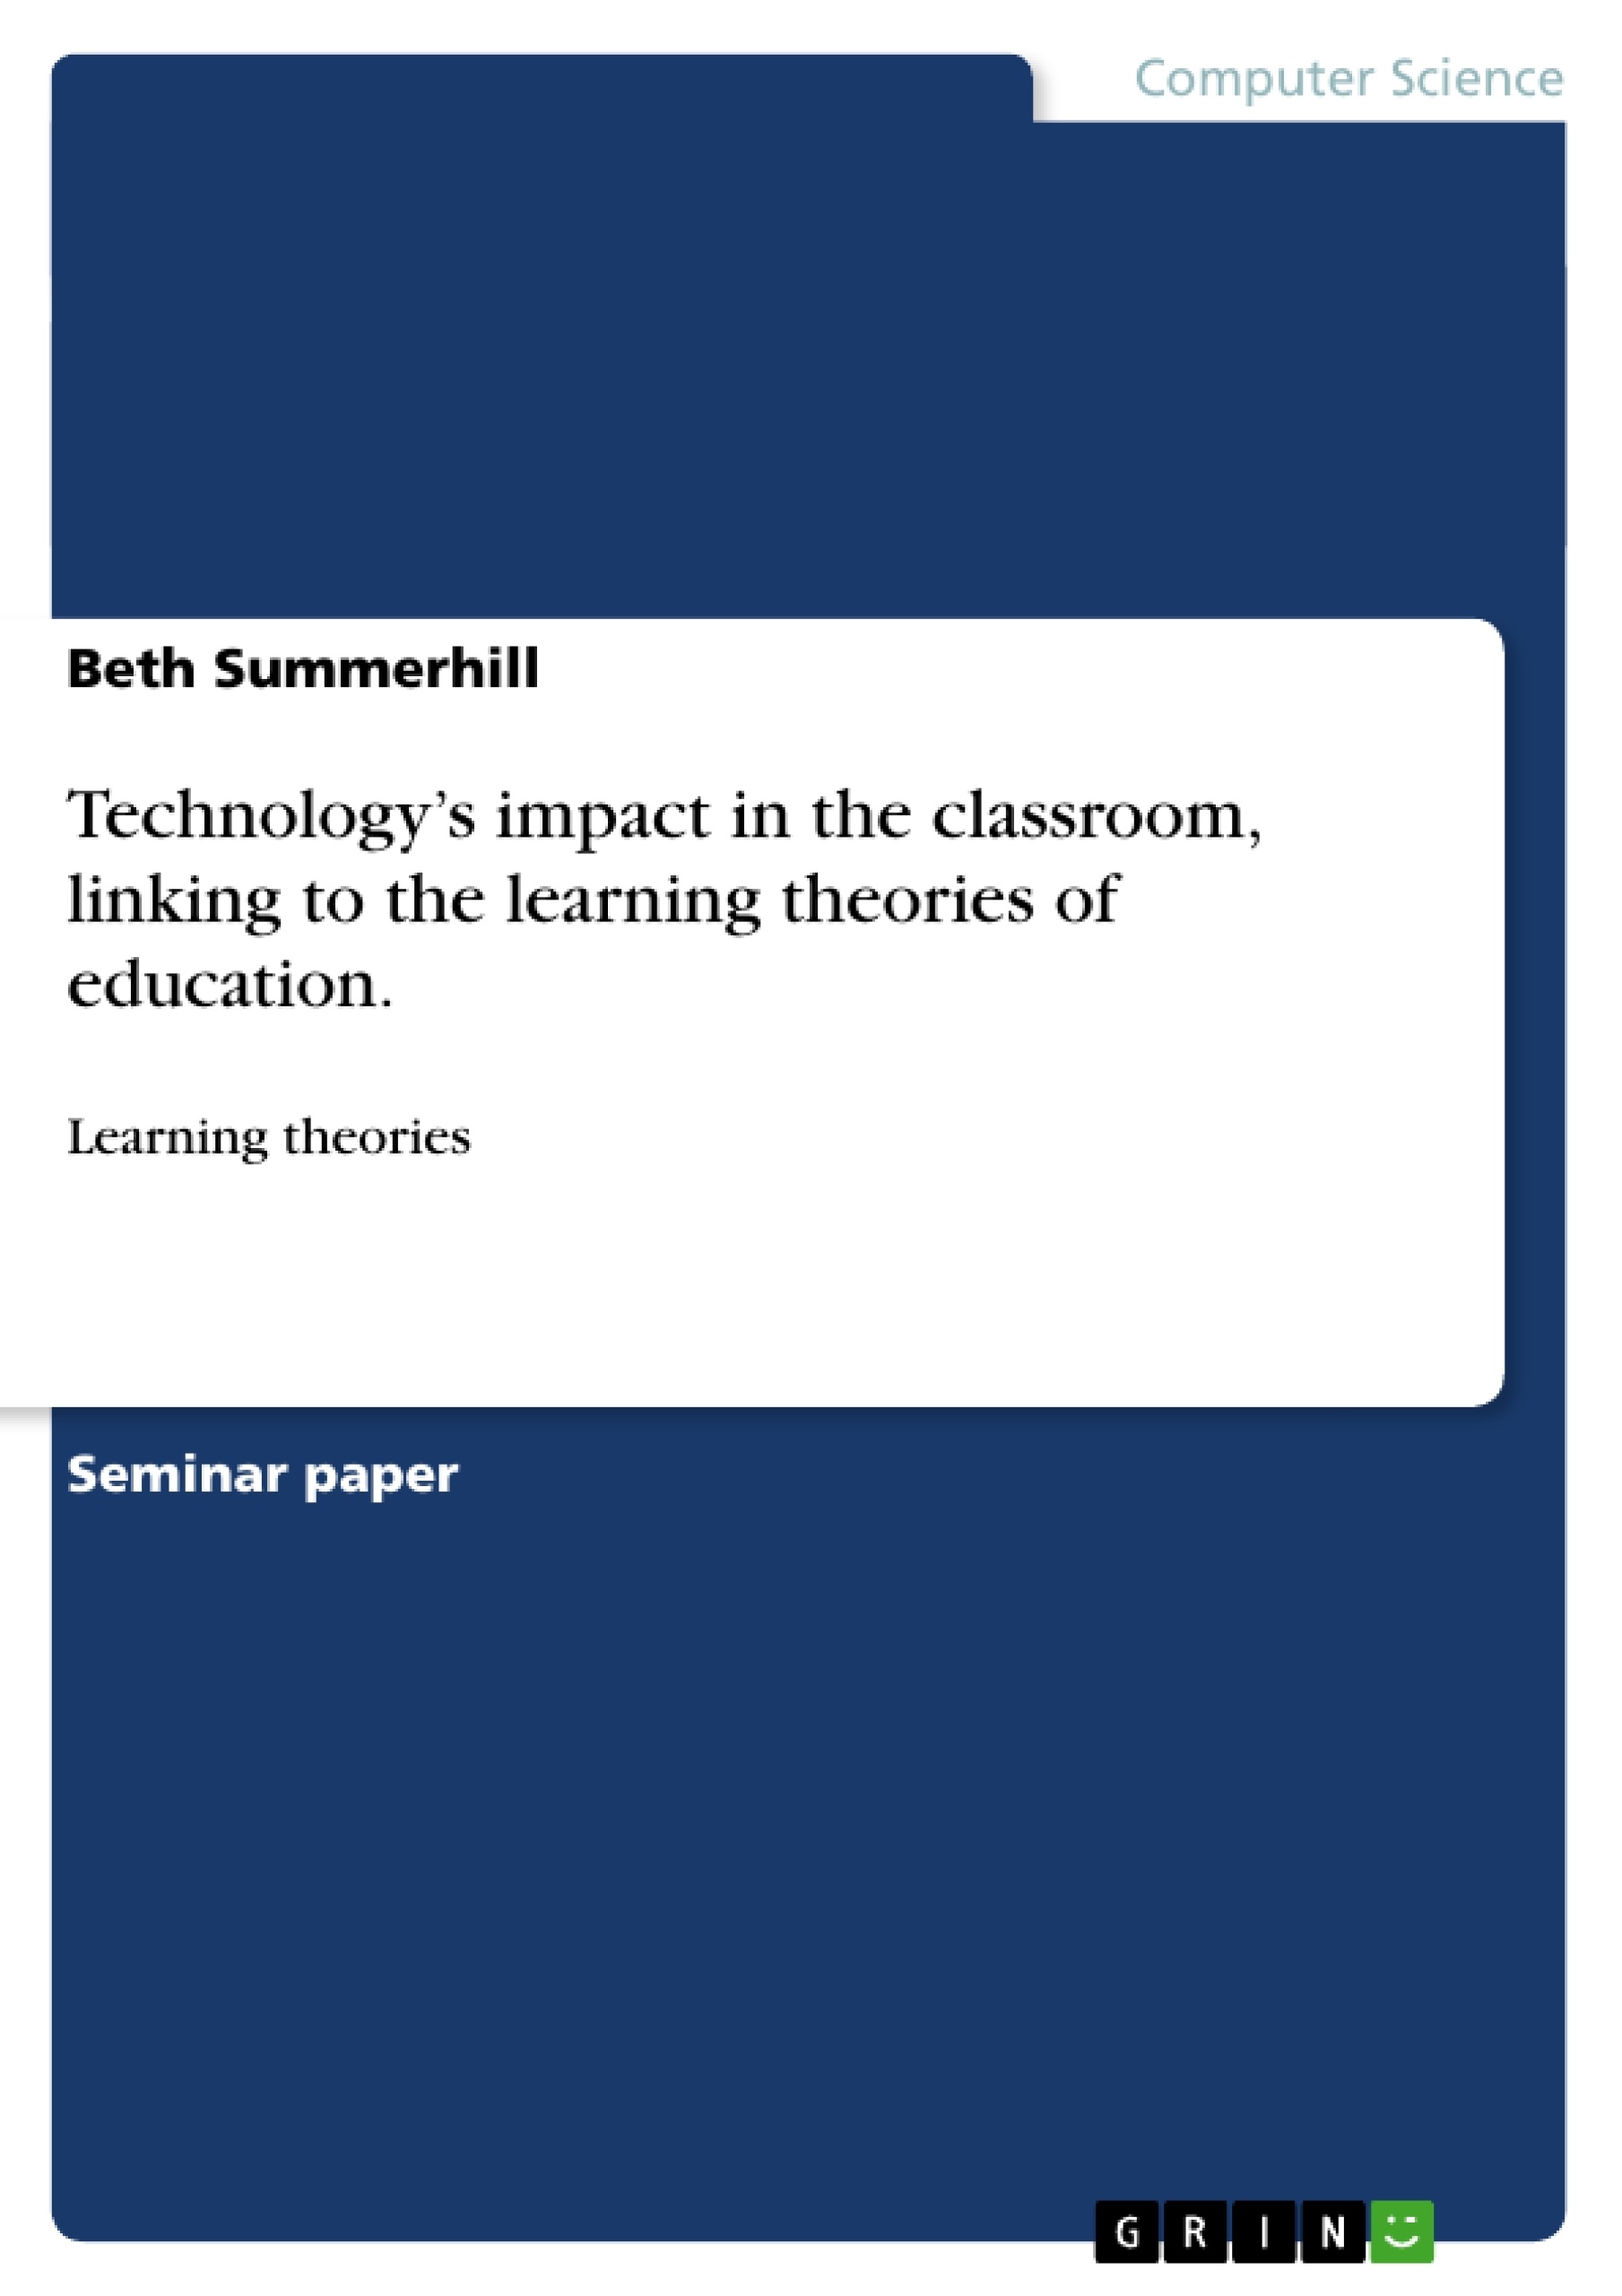 Title: Technology’s impact in the classroom, linking to the learning theories of education.